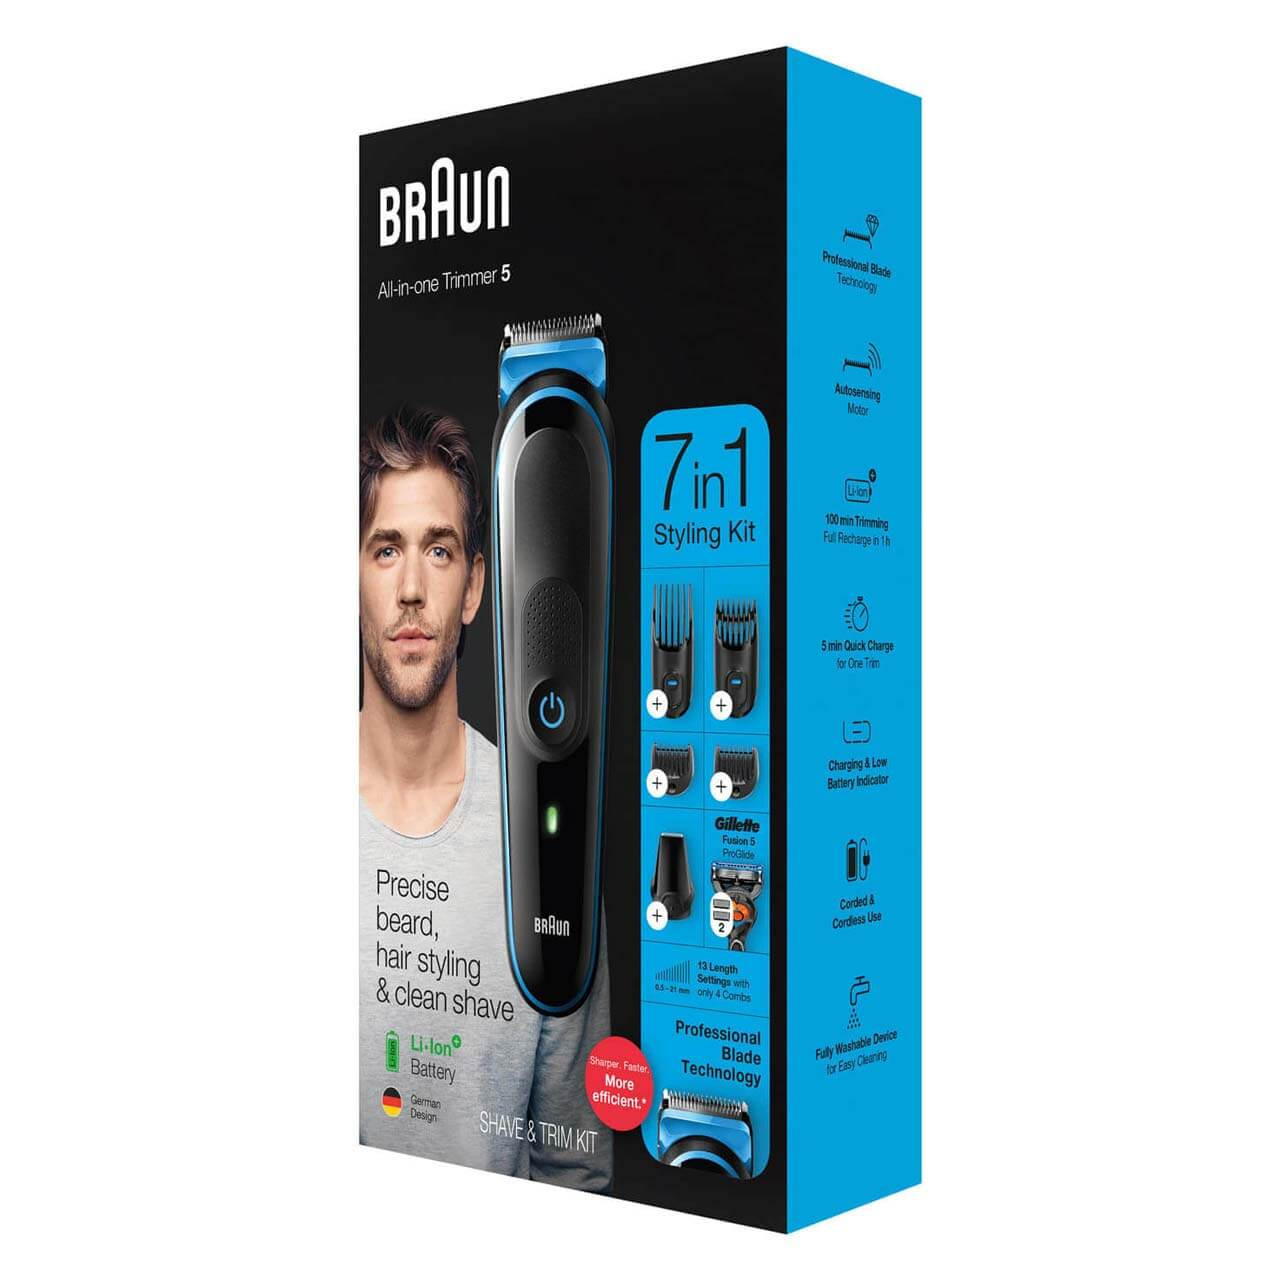 All-in-One trimmer 5 for Face, Hair, and Body, Black/Blue 7-in-1 styling